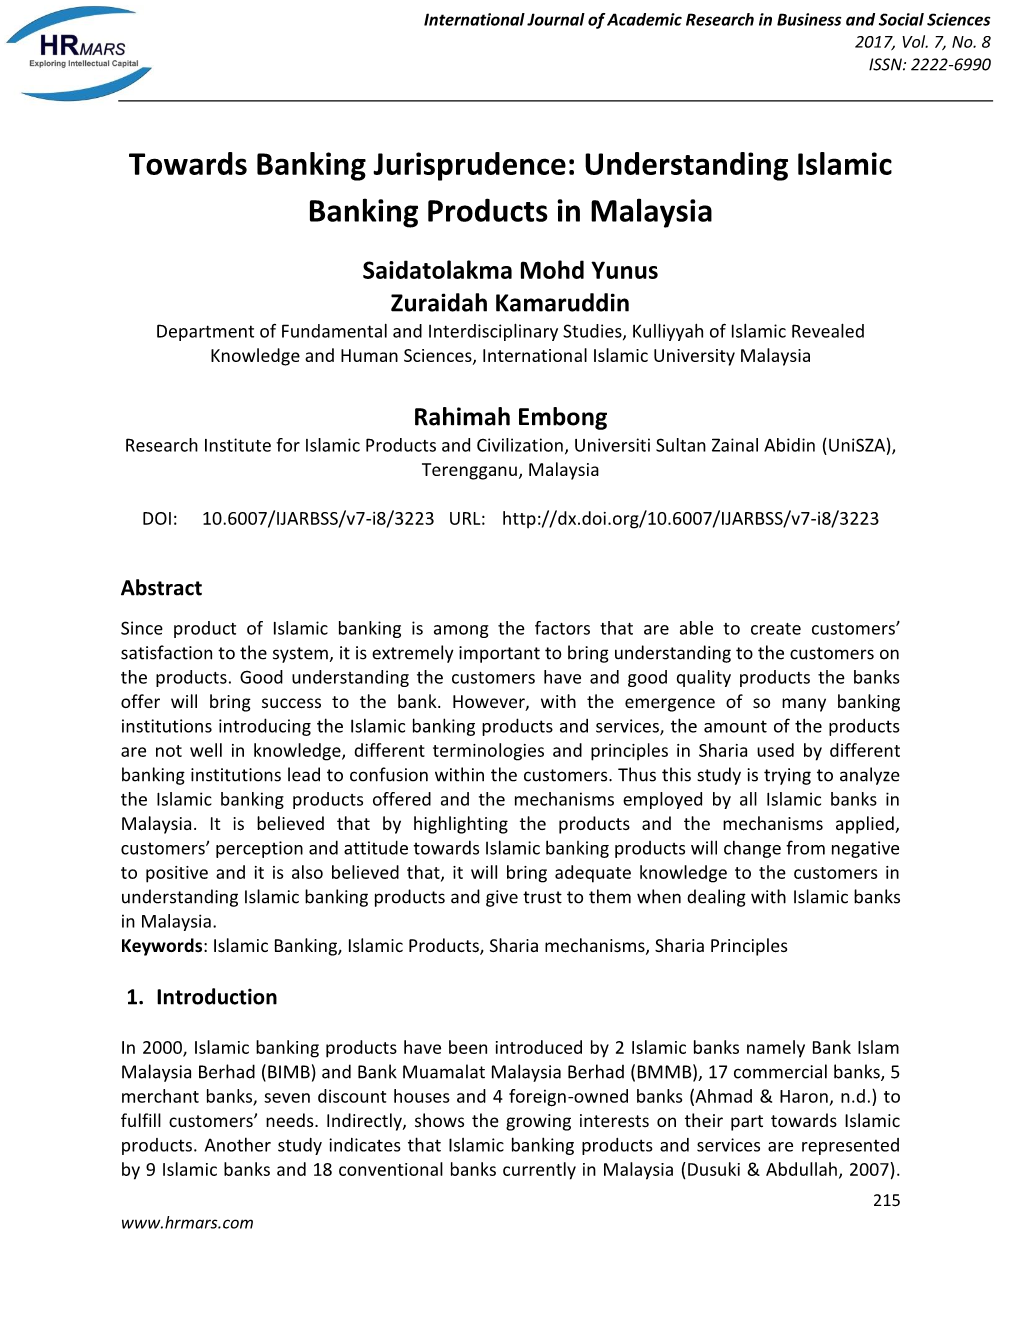 Understanding Islamic Banking Products in Malaysia